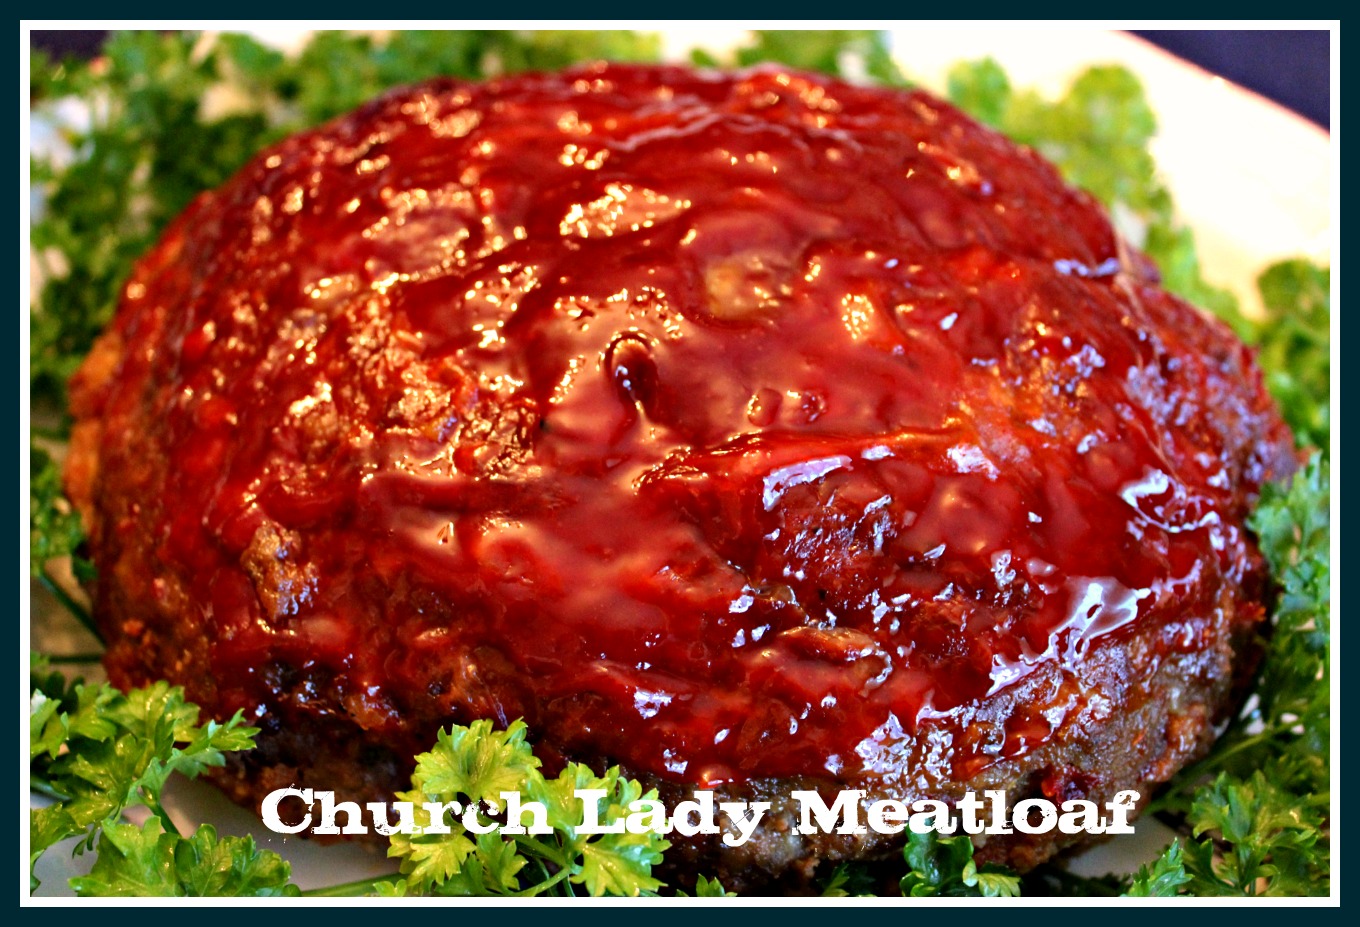 Church Lady Meatloaf